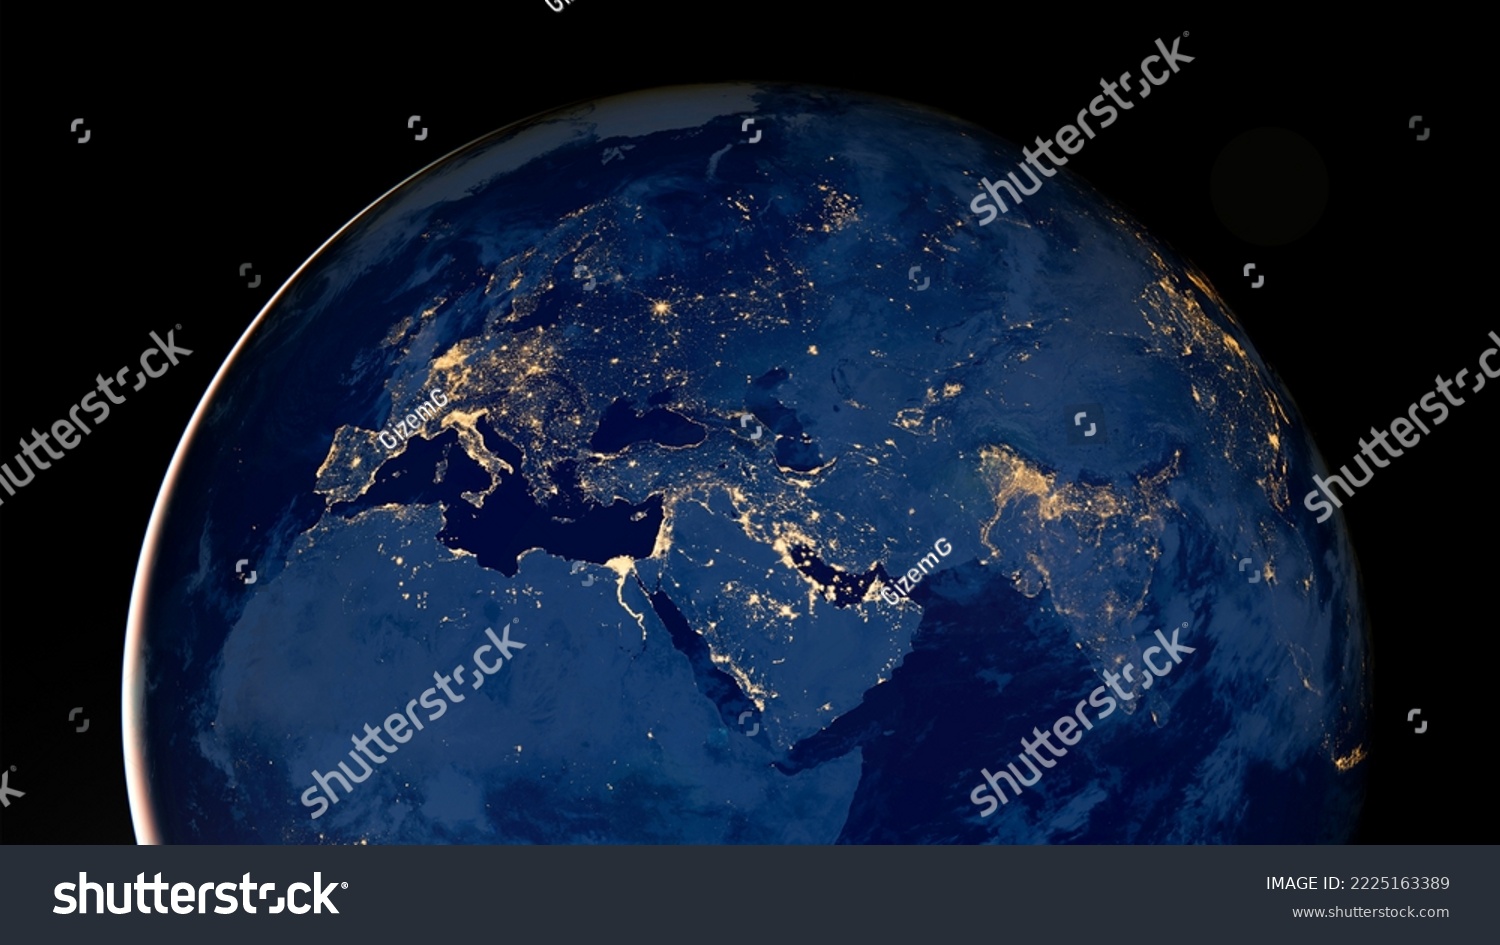 Planet earth photo at night on black background, City Lights of Africa, Europe, and the Middle East from space, World map at night, HD satellite image. Elements of this image furnished by NASA. #2225163389